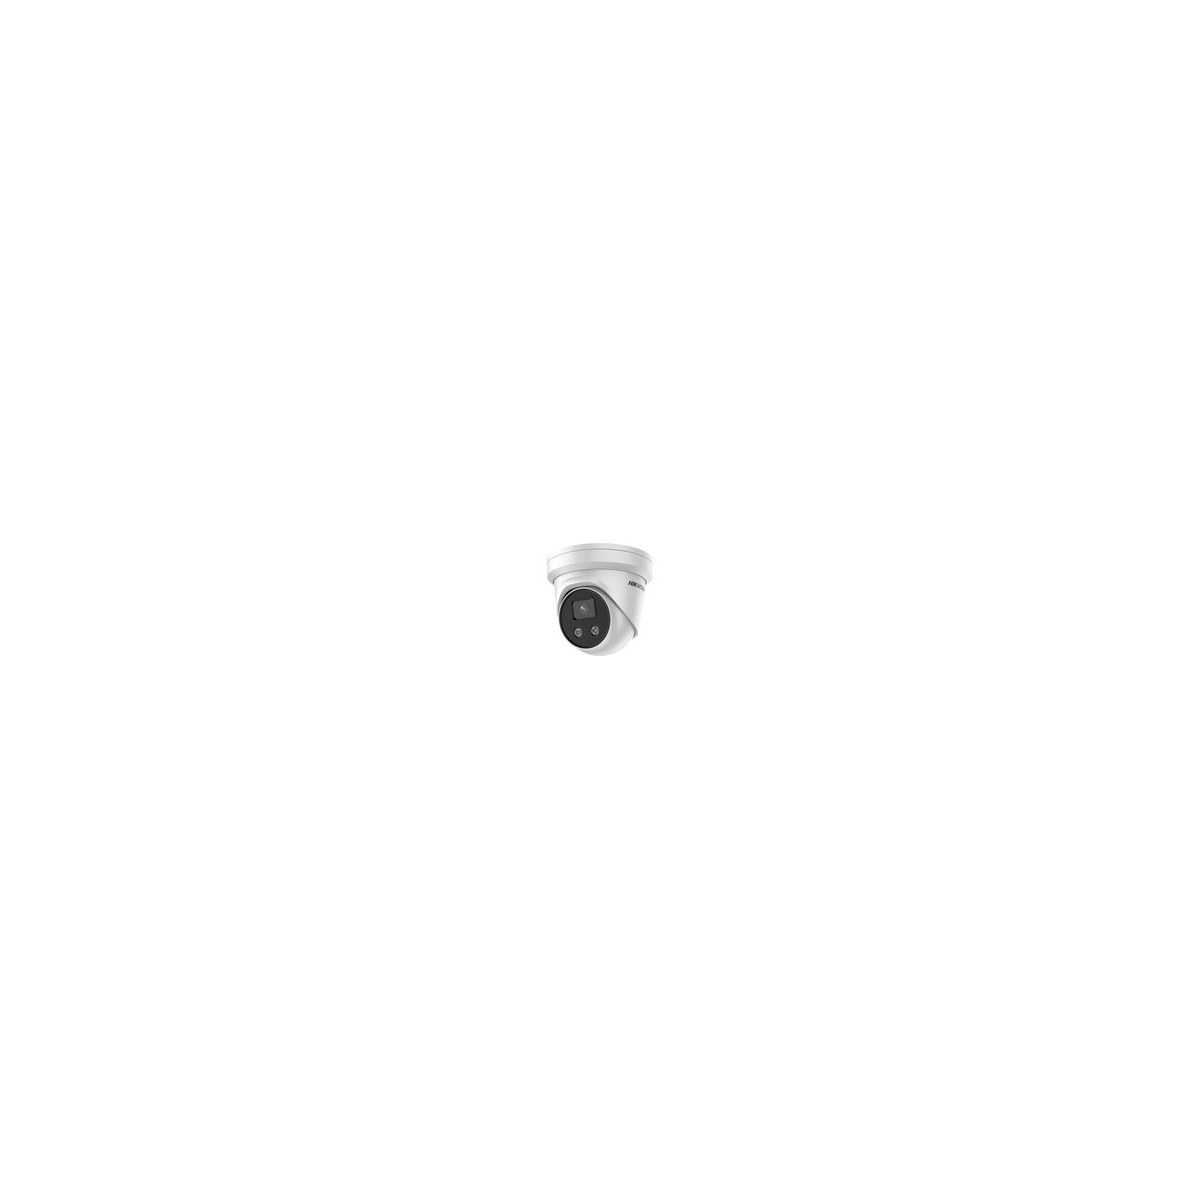 Hikvision Digital Technology DS-2CD3356G2-ISU - IP security camera - Outdoor - Wired - Ceiling-wall - White - Turret